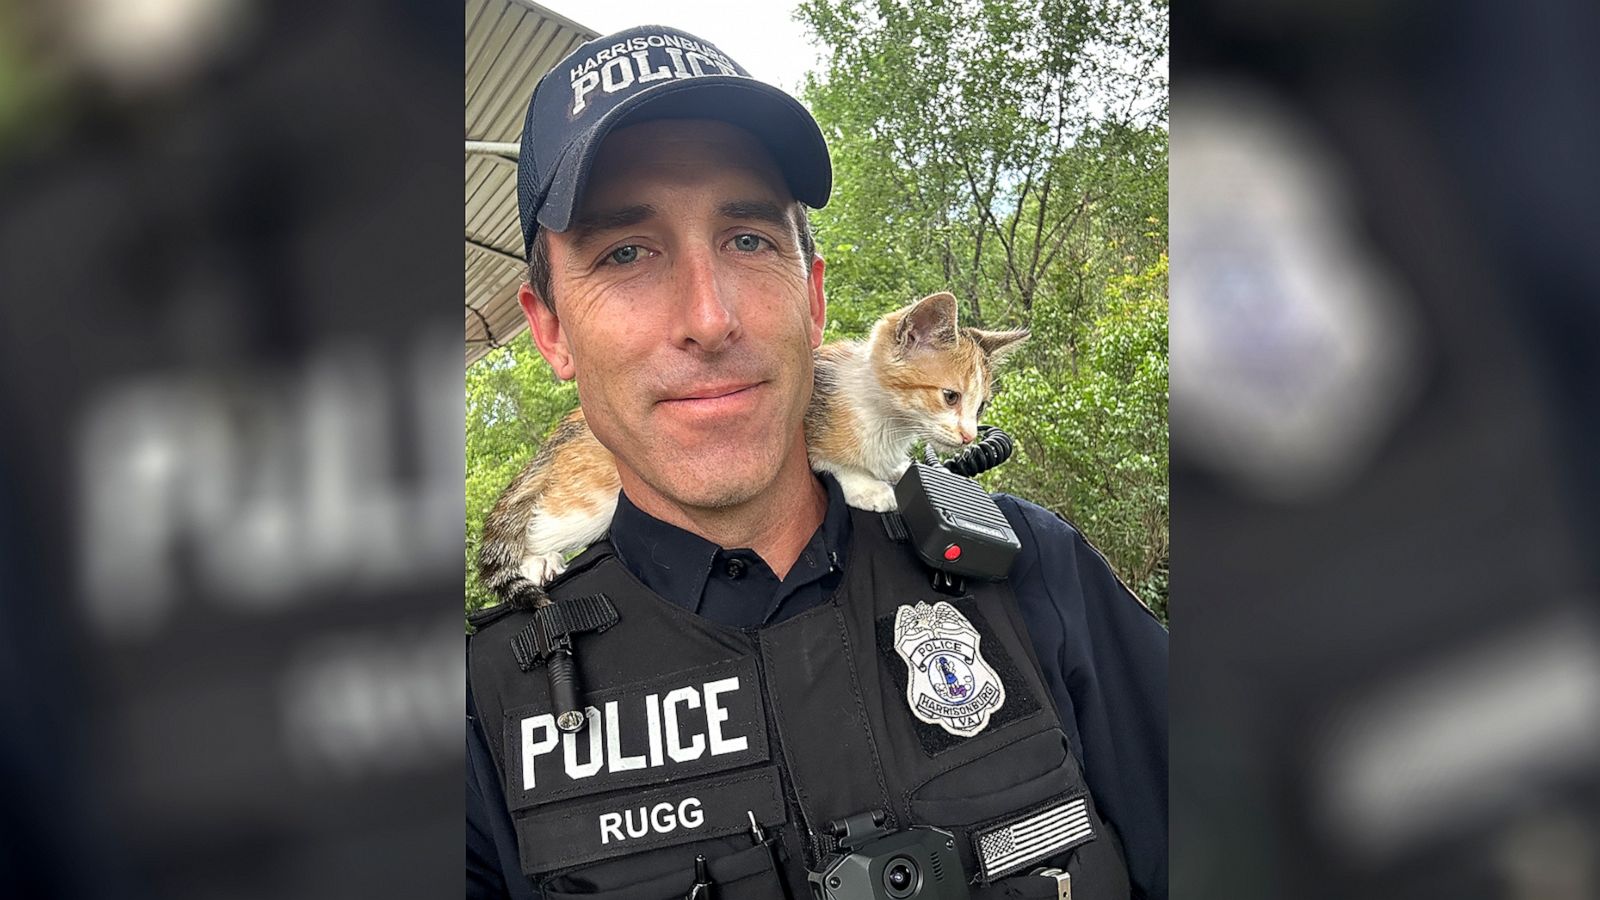 Police officer rescues cat running loose on bridge